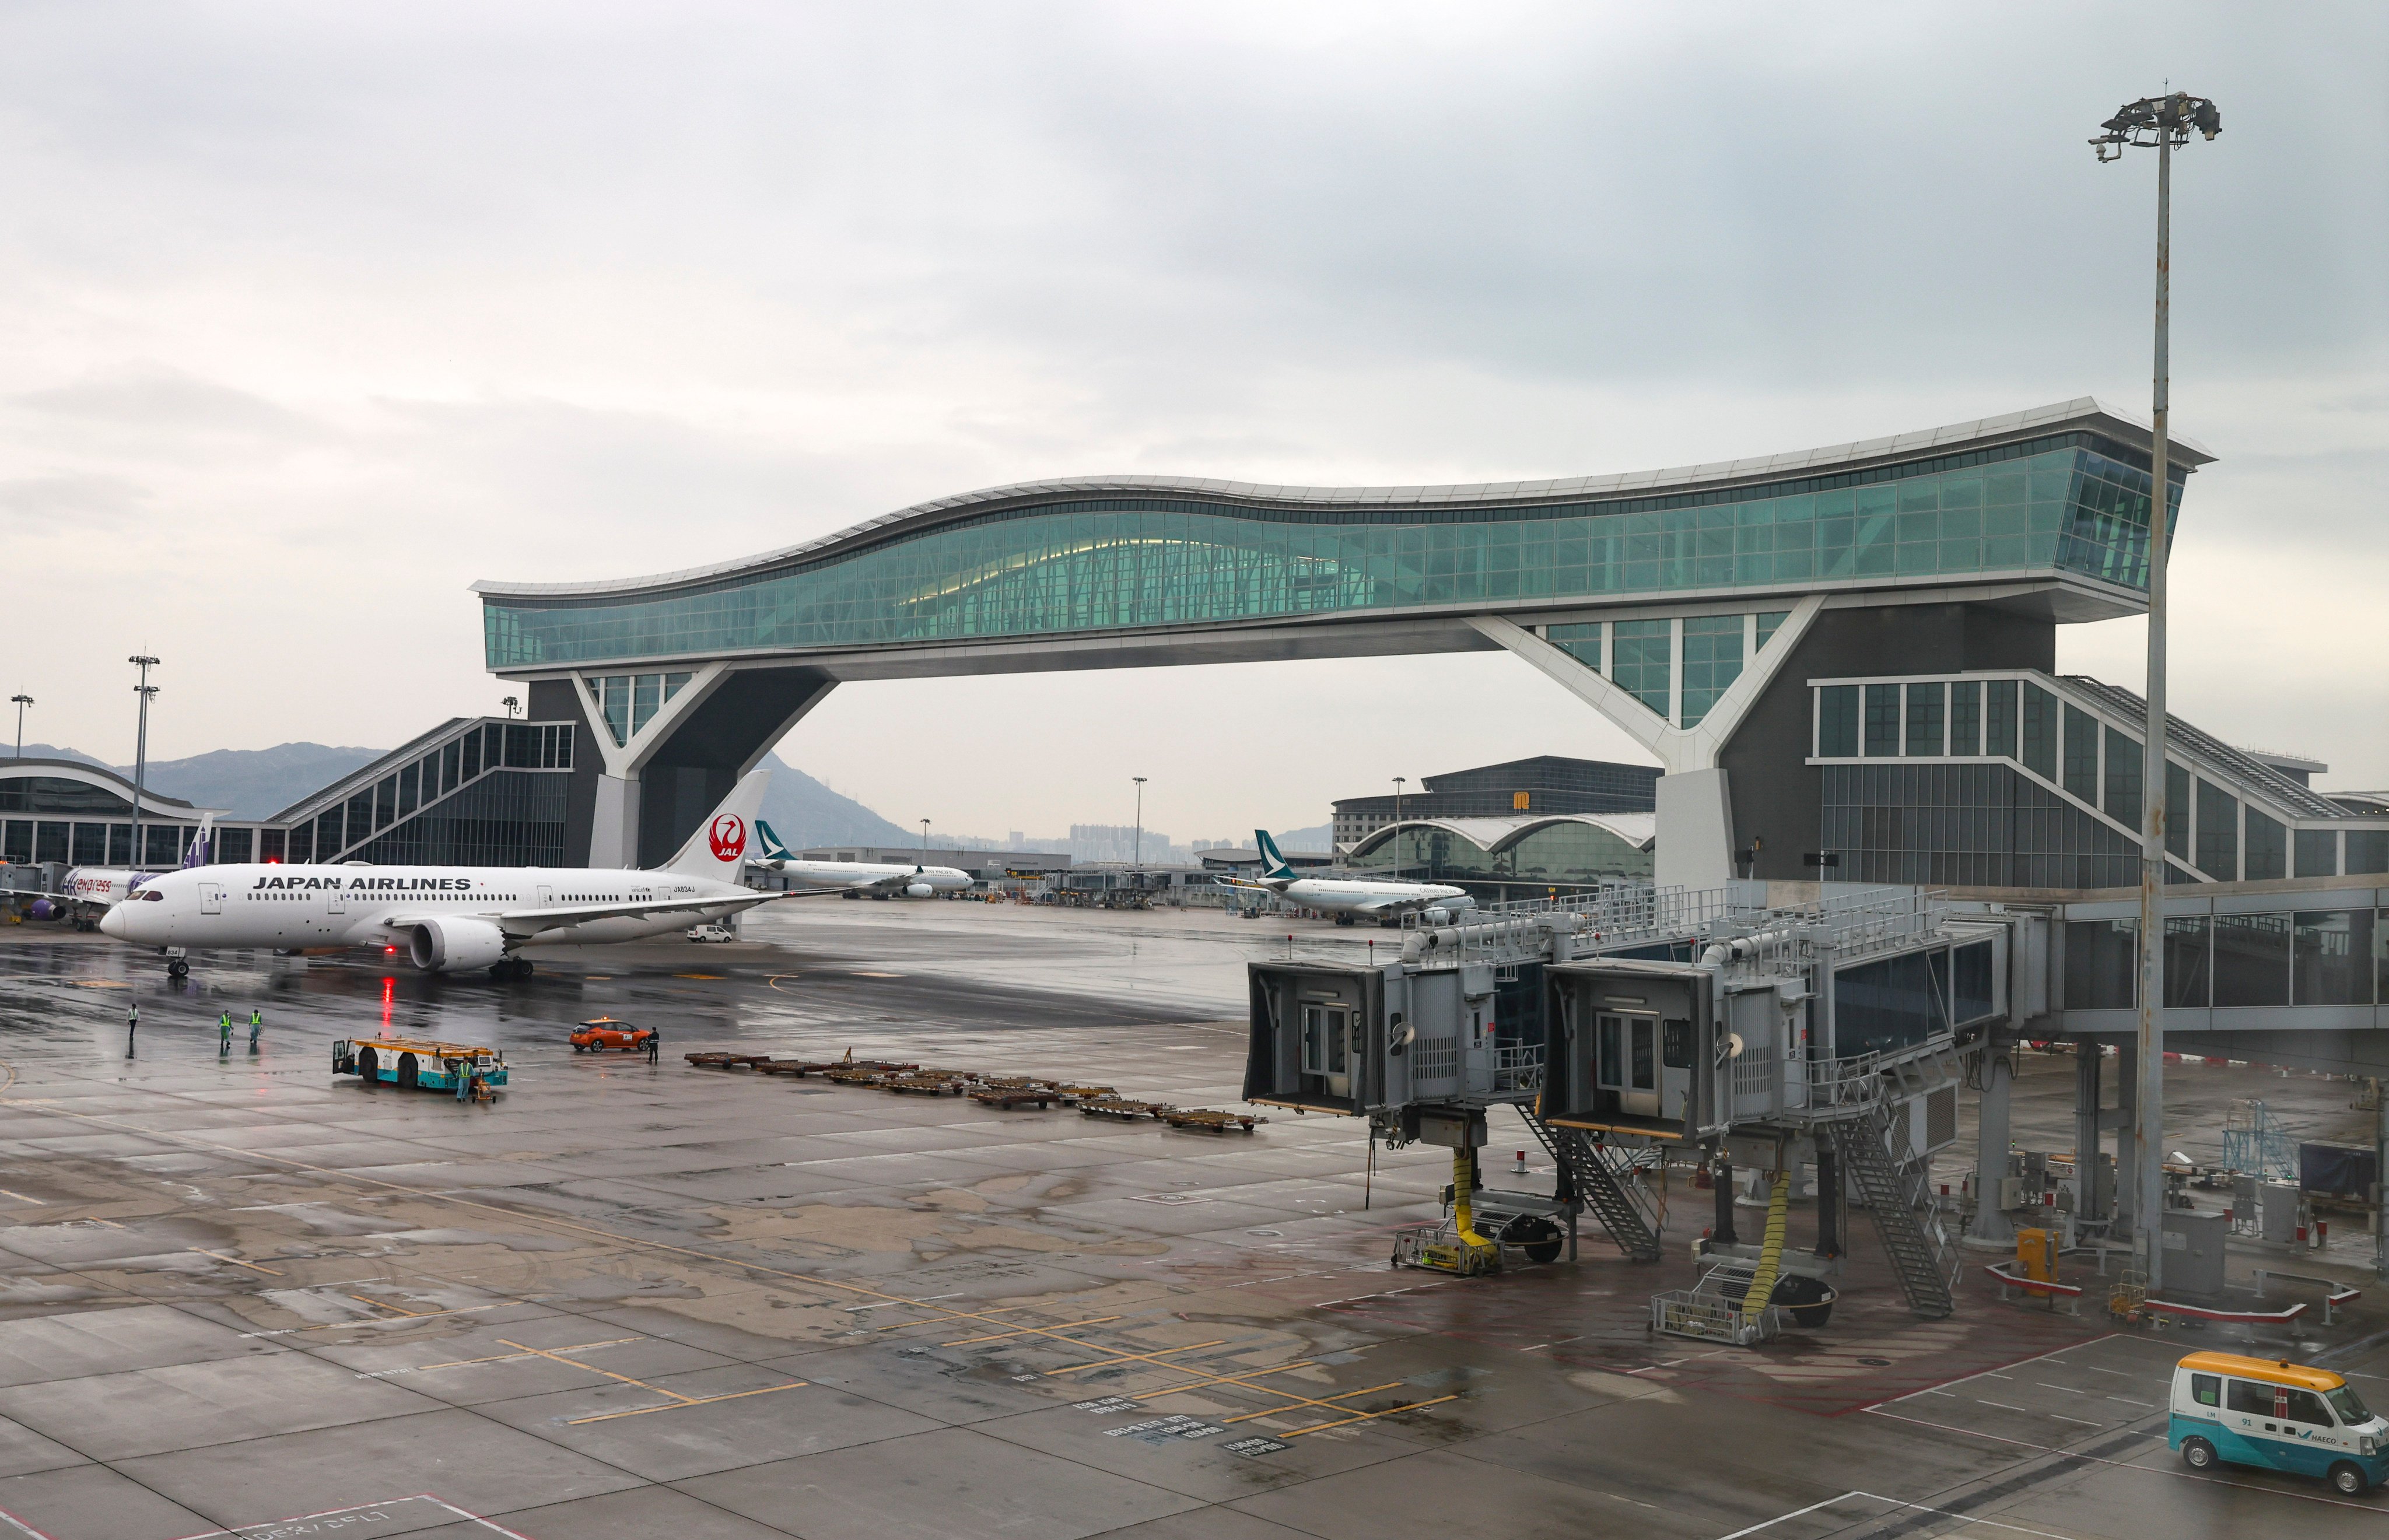 The new Sky Bridge at the Hong Kong International Airport is part of a wider HK$9 billion (US$1.15 billion) expansion and upgrade of the airport’s infrastructure and facilities. Photo: Yik Yeung-man